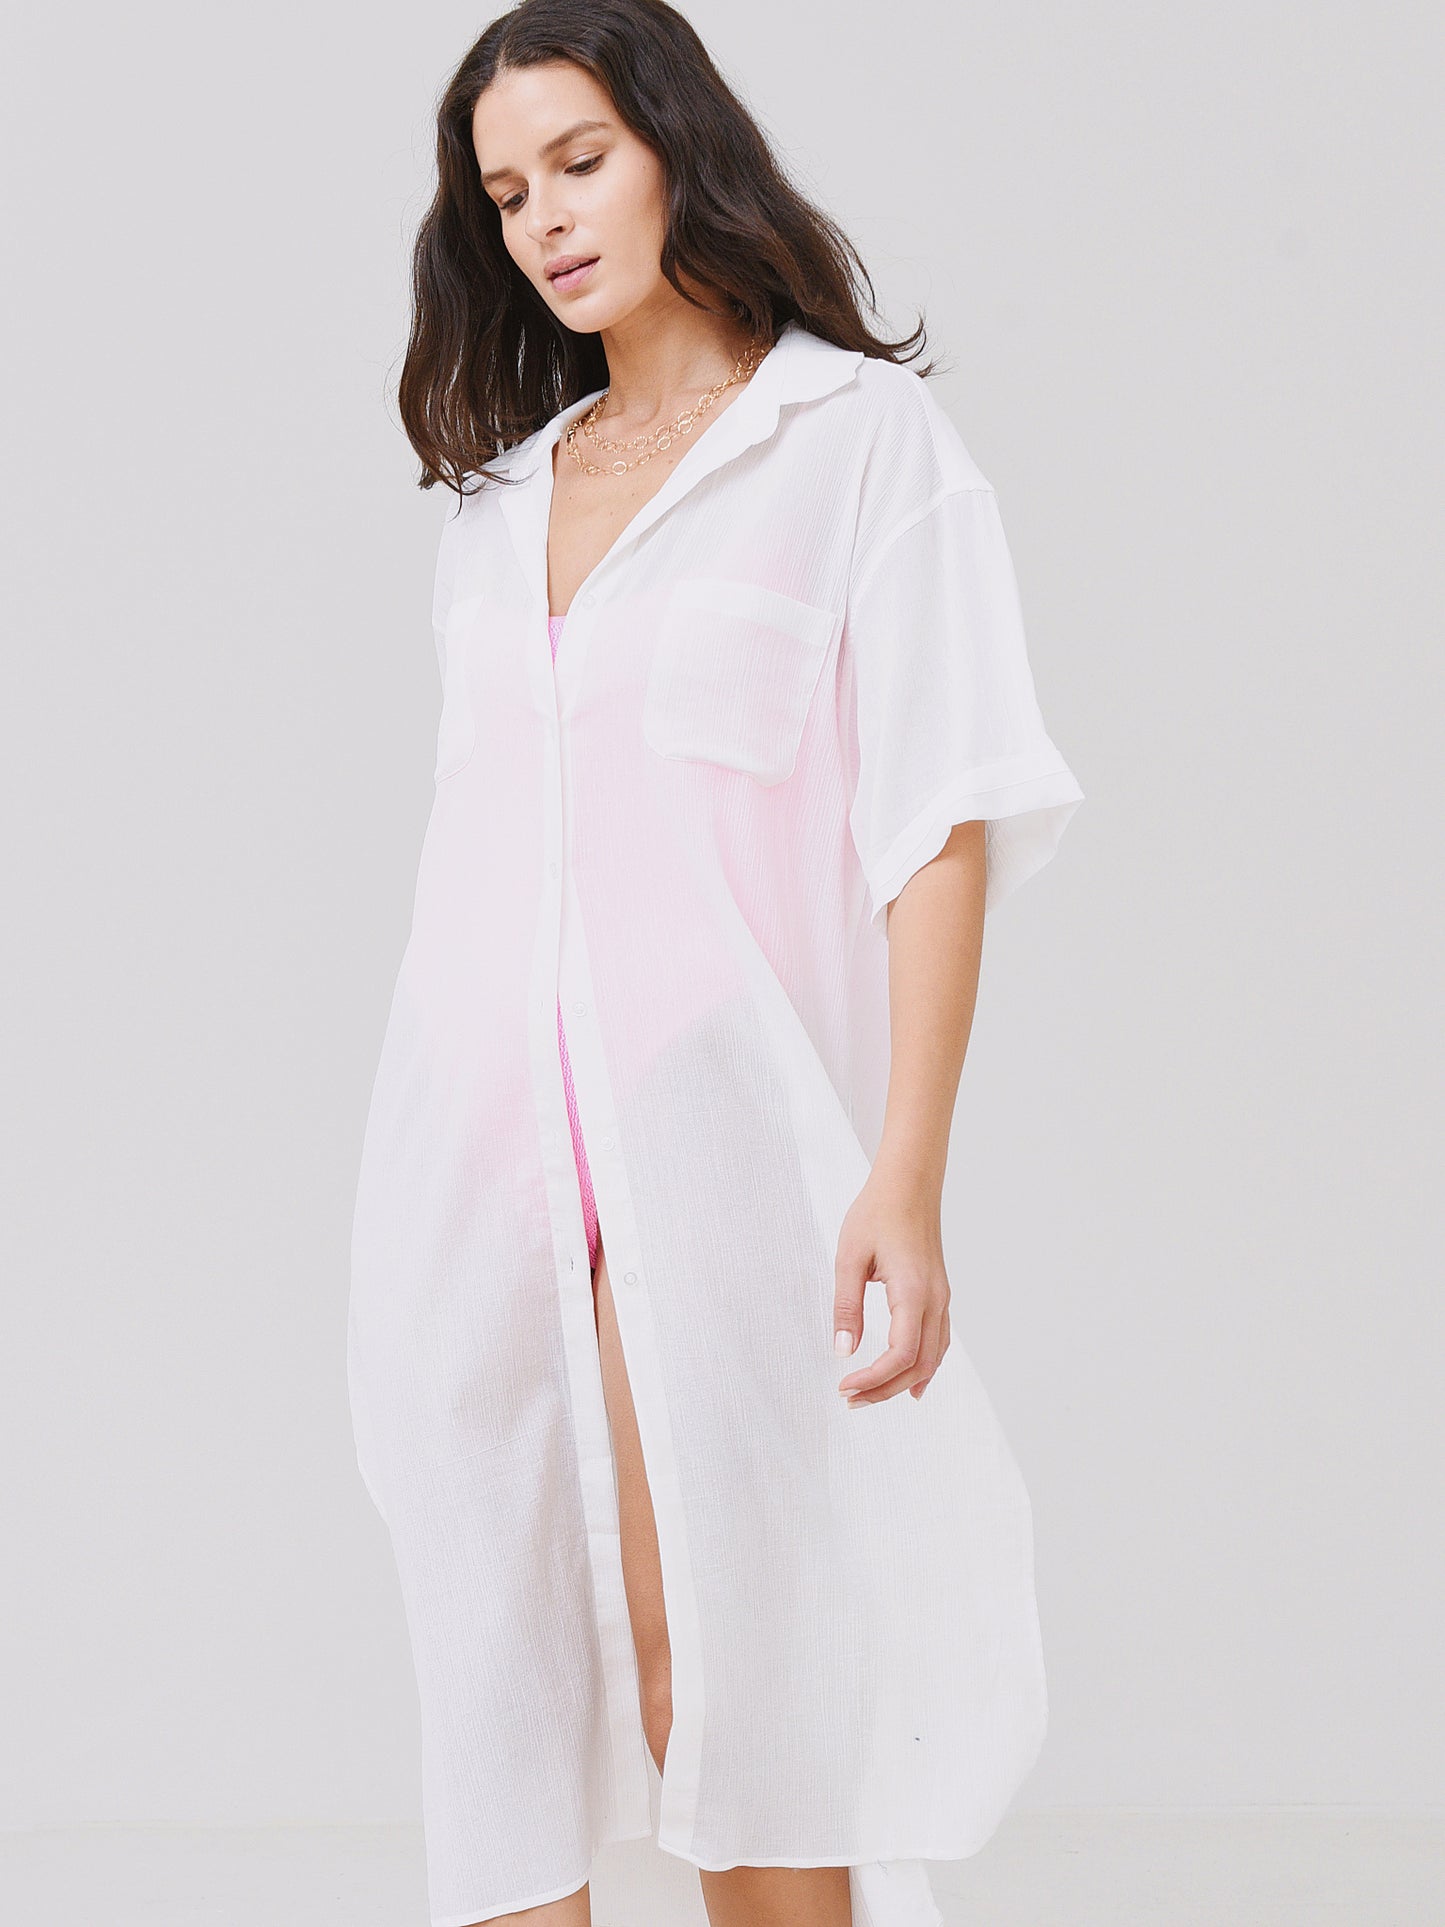 Z Supply Women's Lina Button-Up Duster